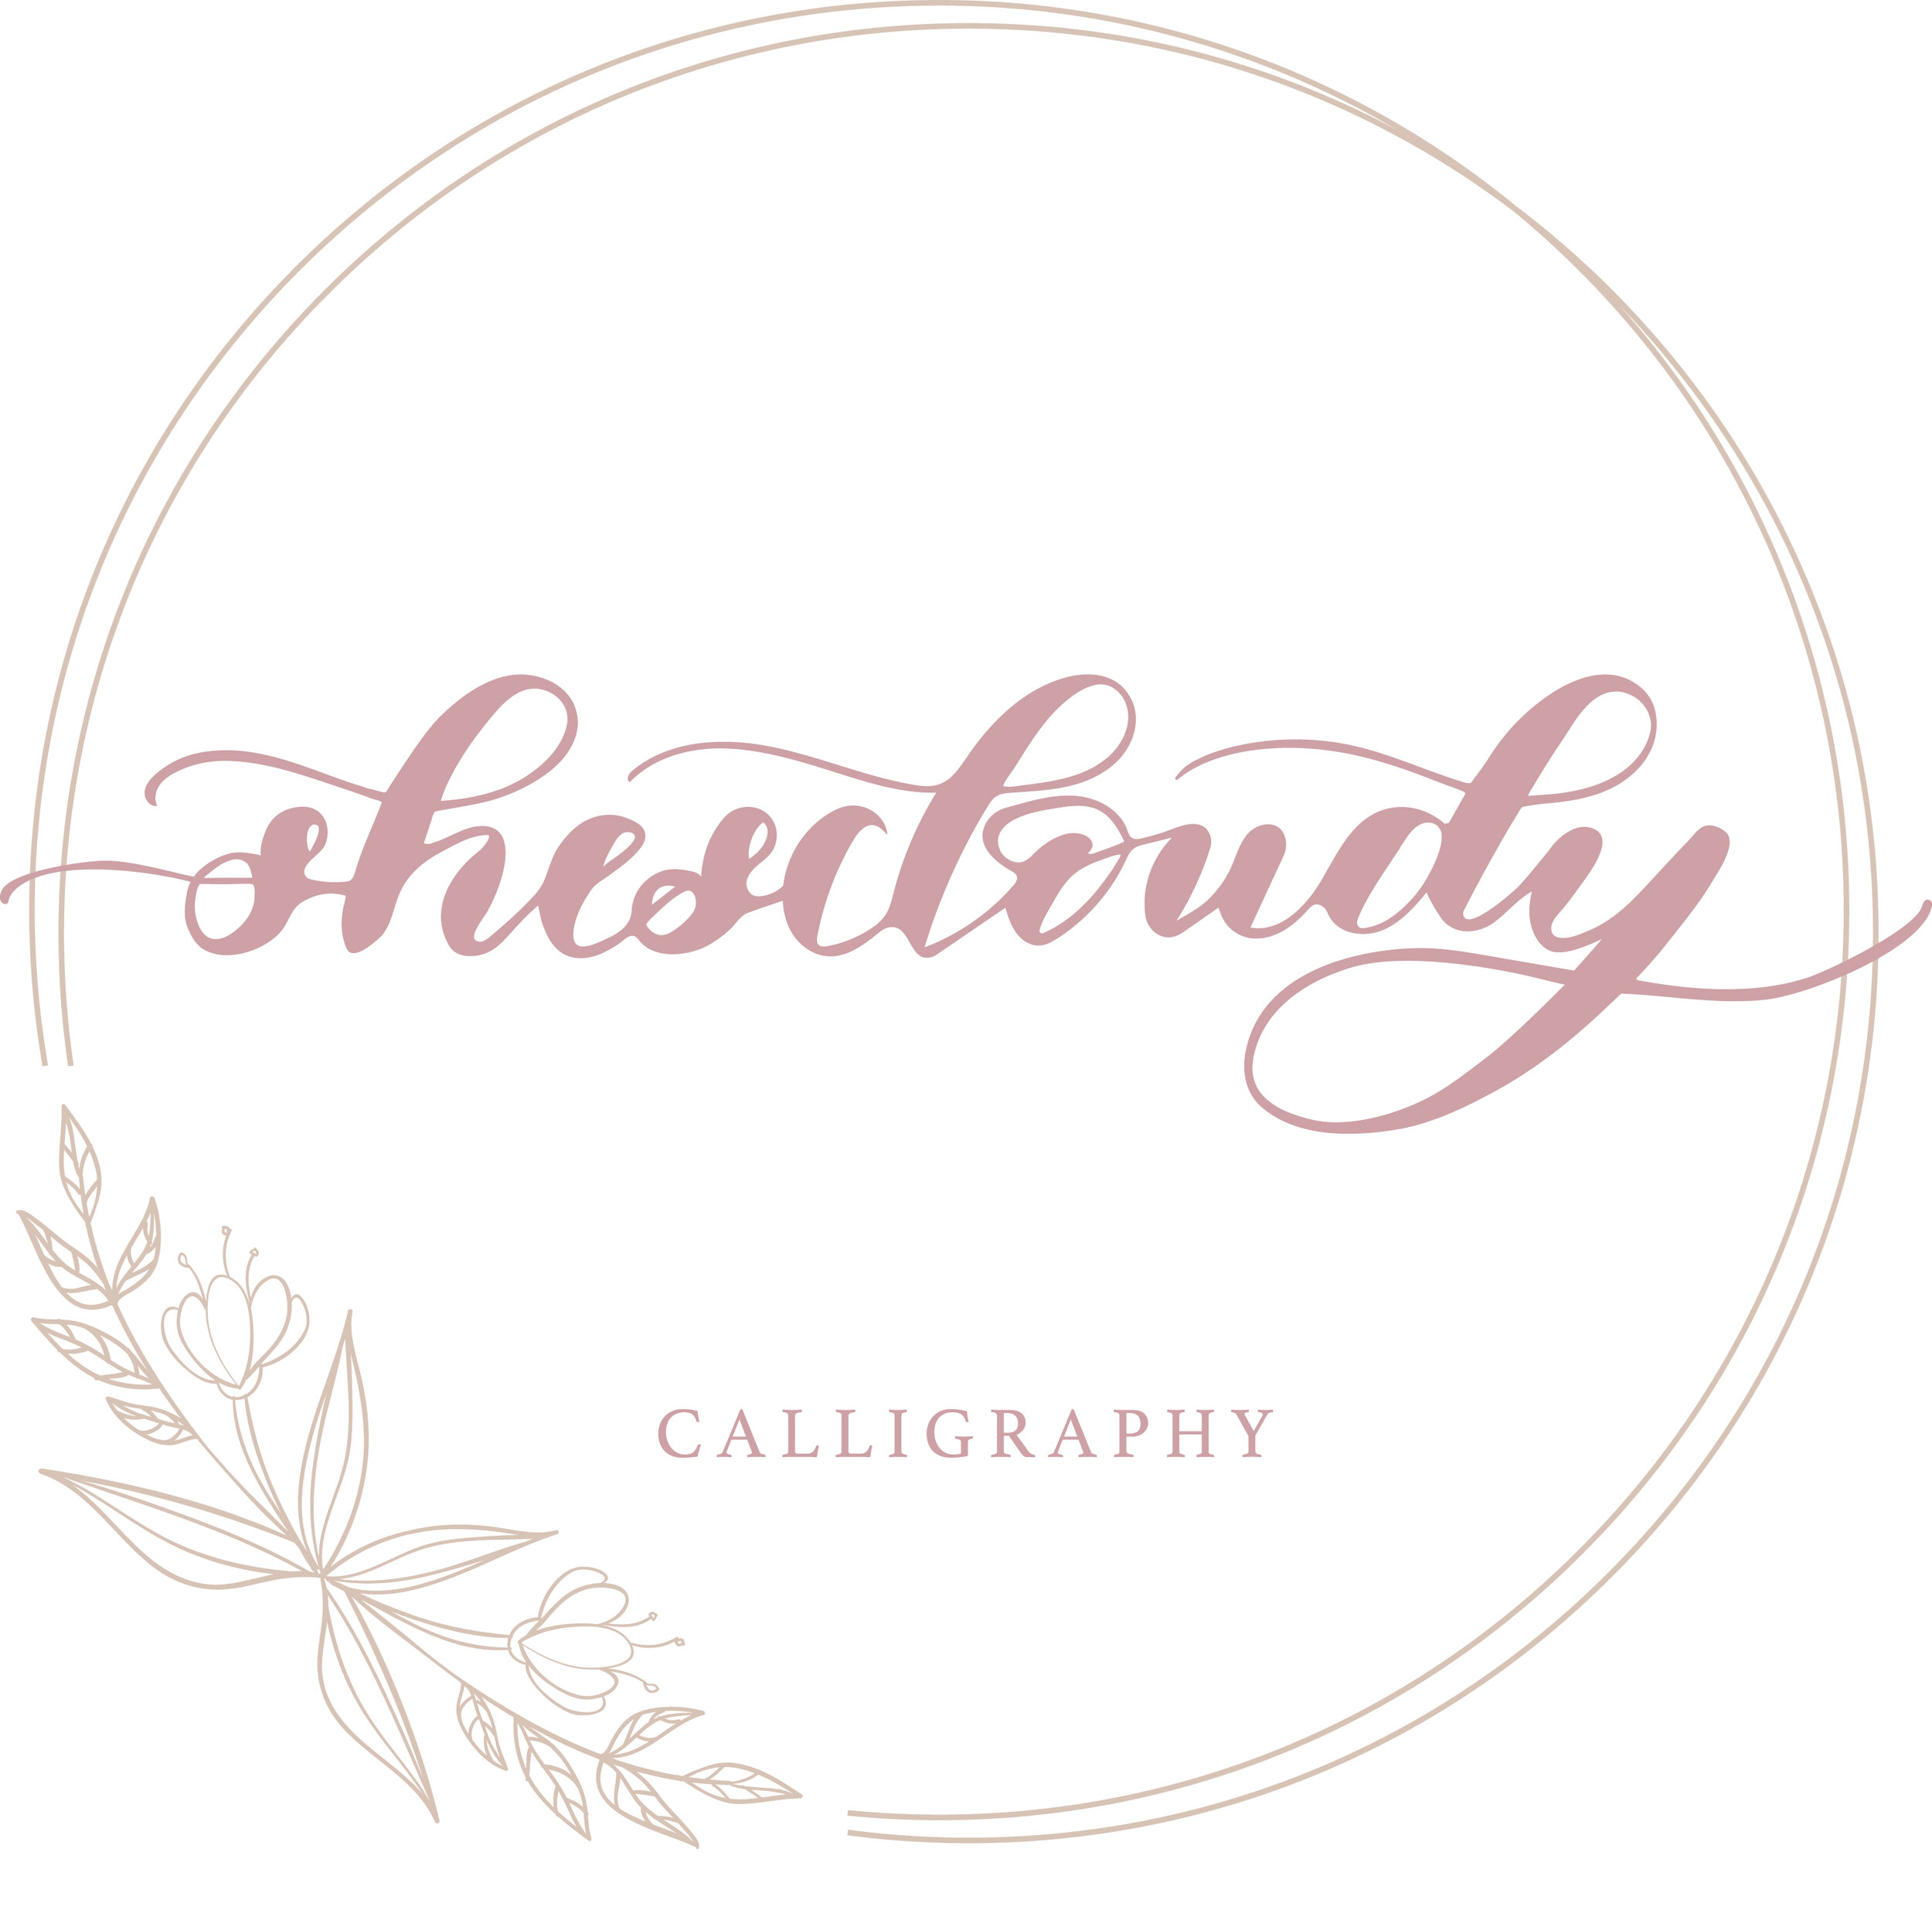 shescloudy calligraphy